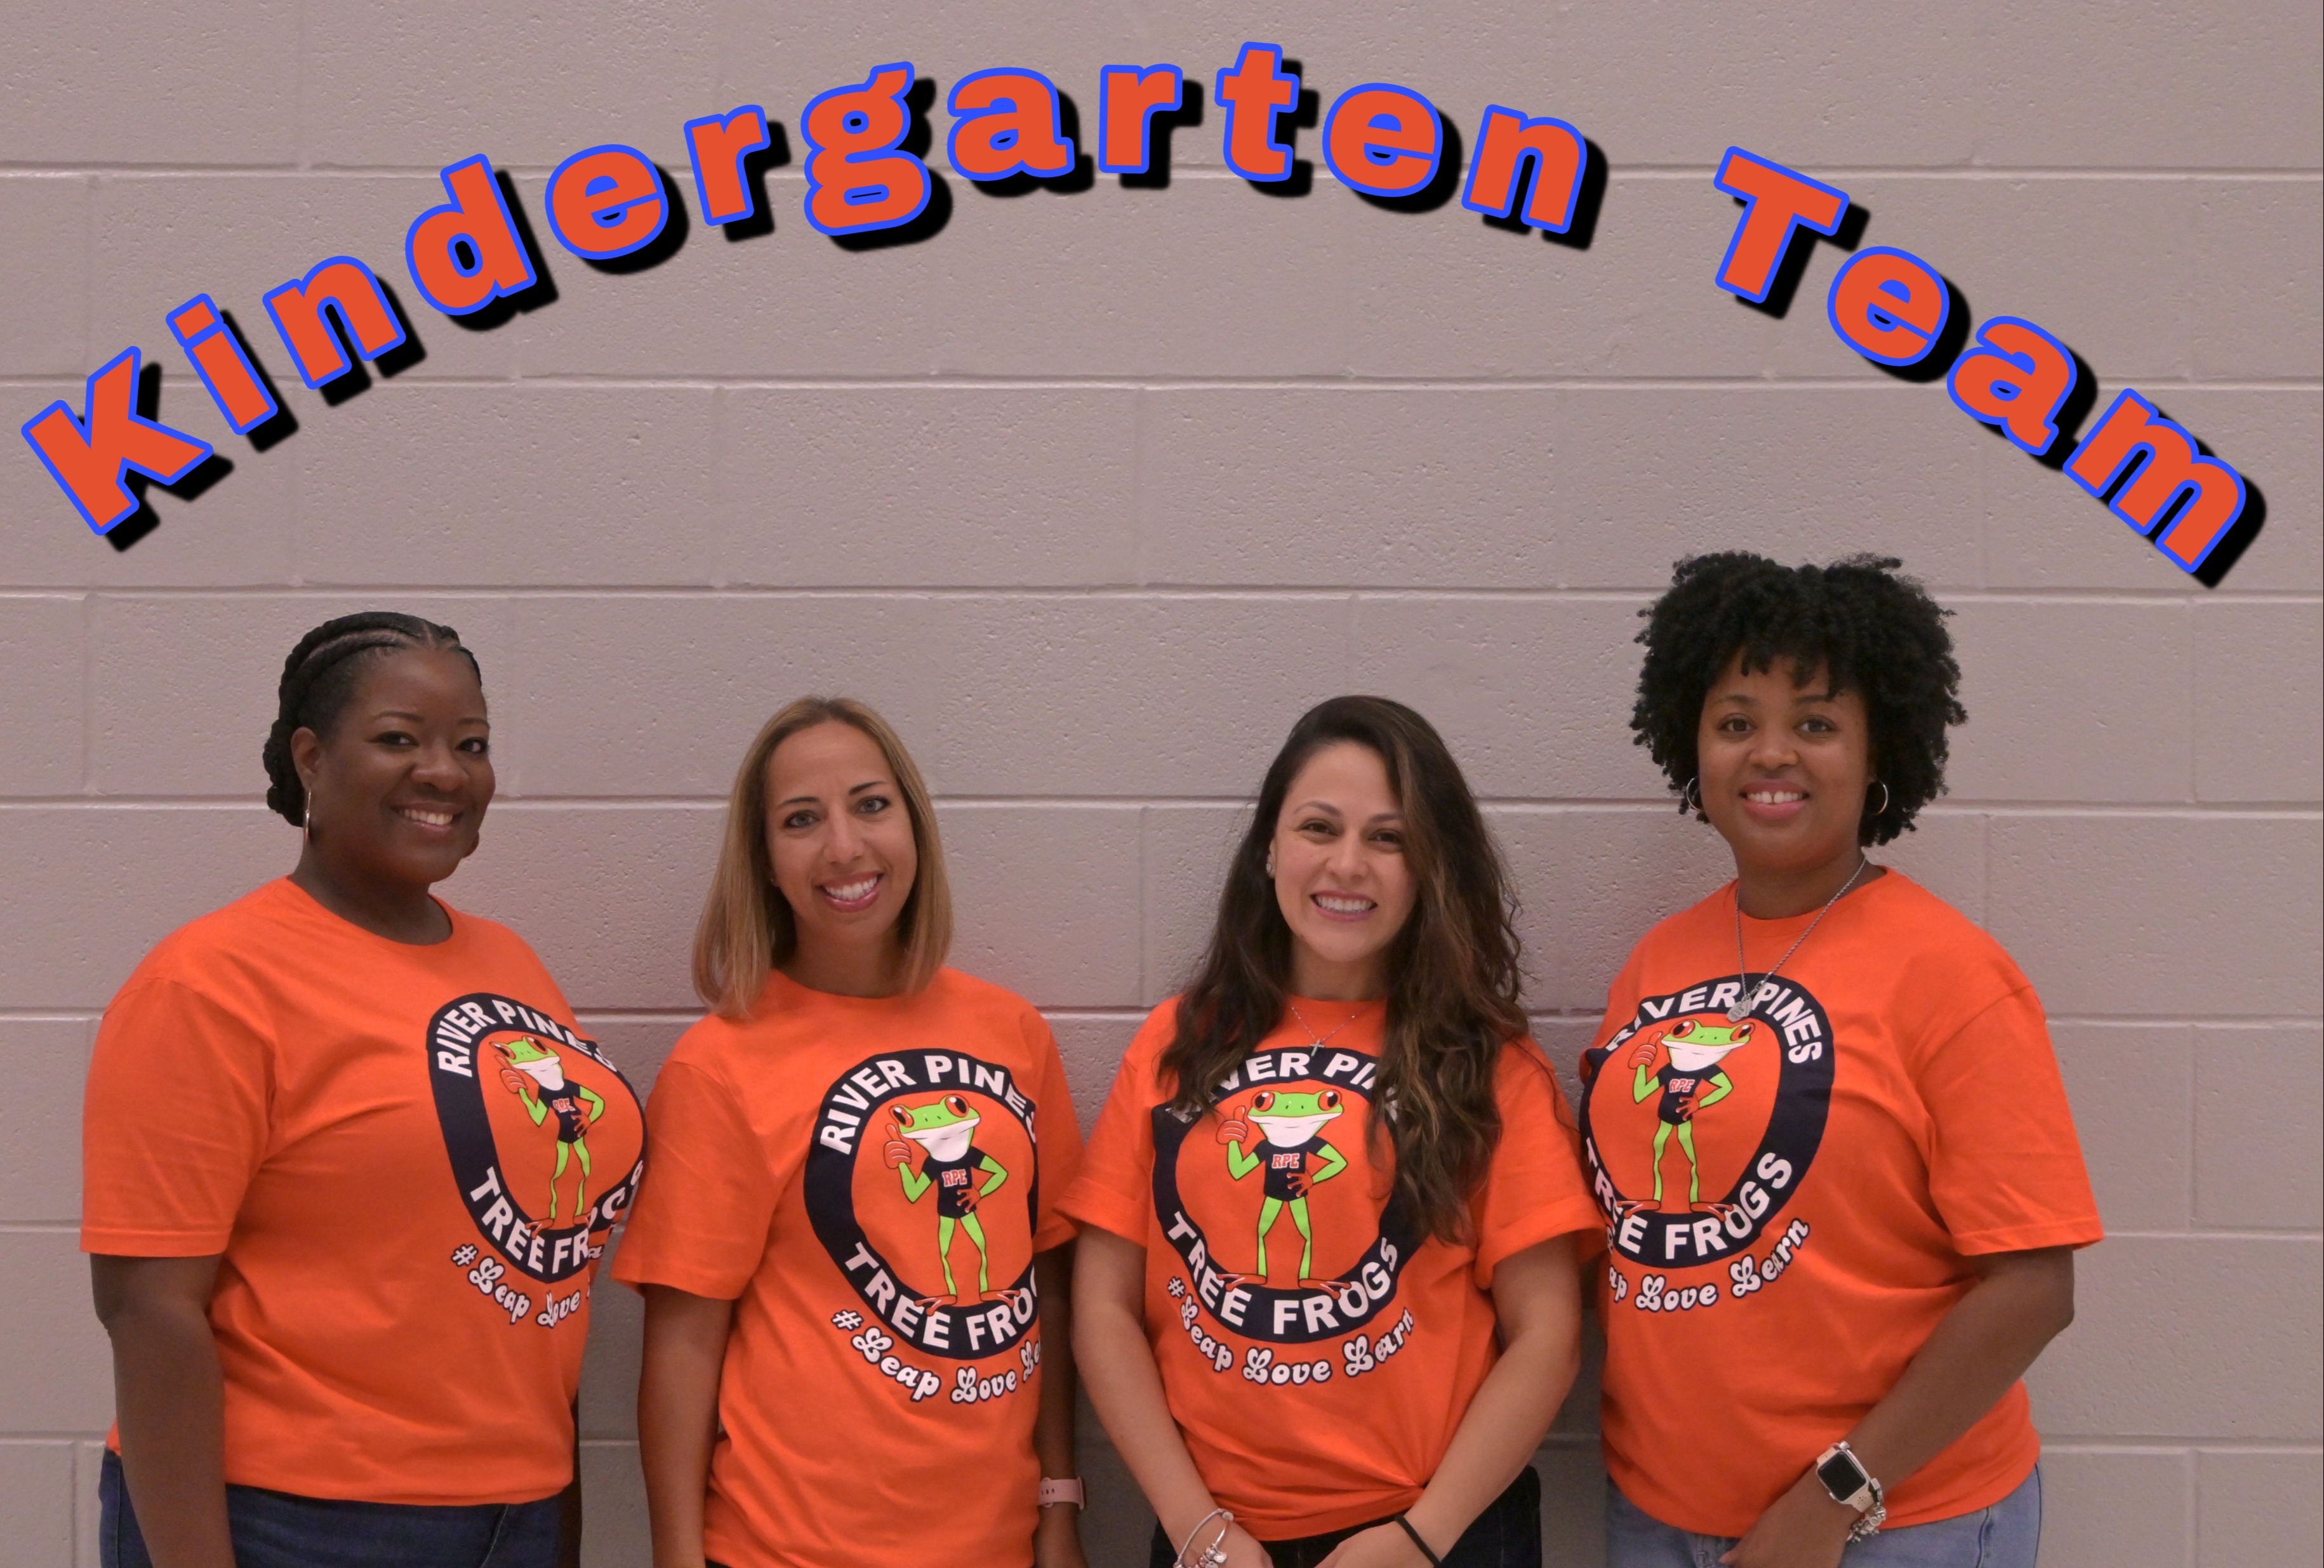 kinder team in orange shirts standing posing in front of gray brick wall